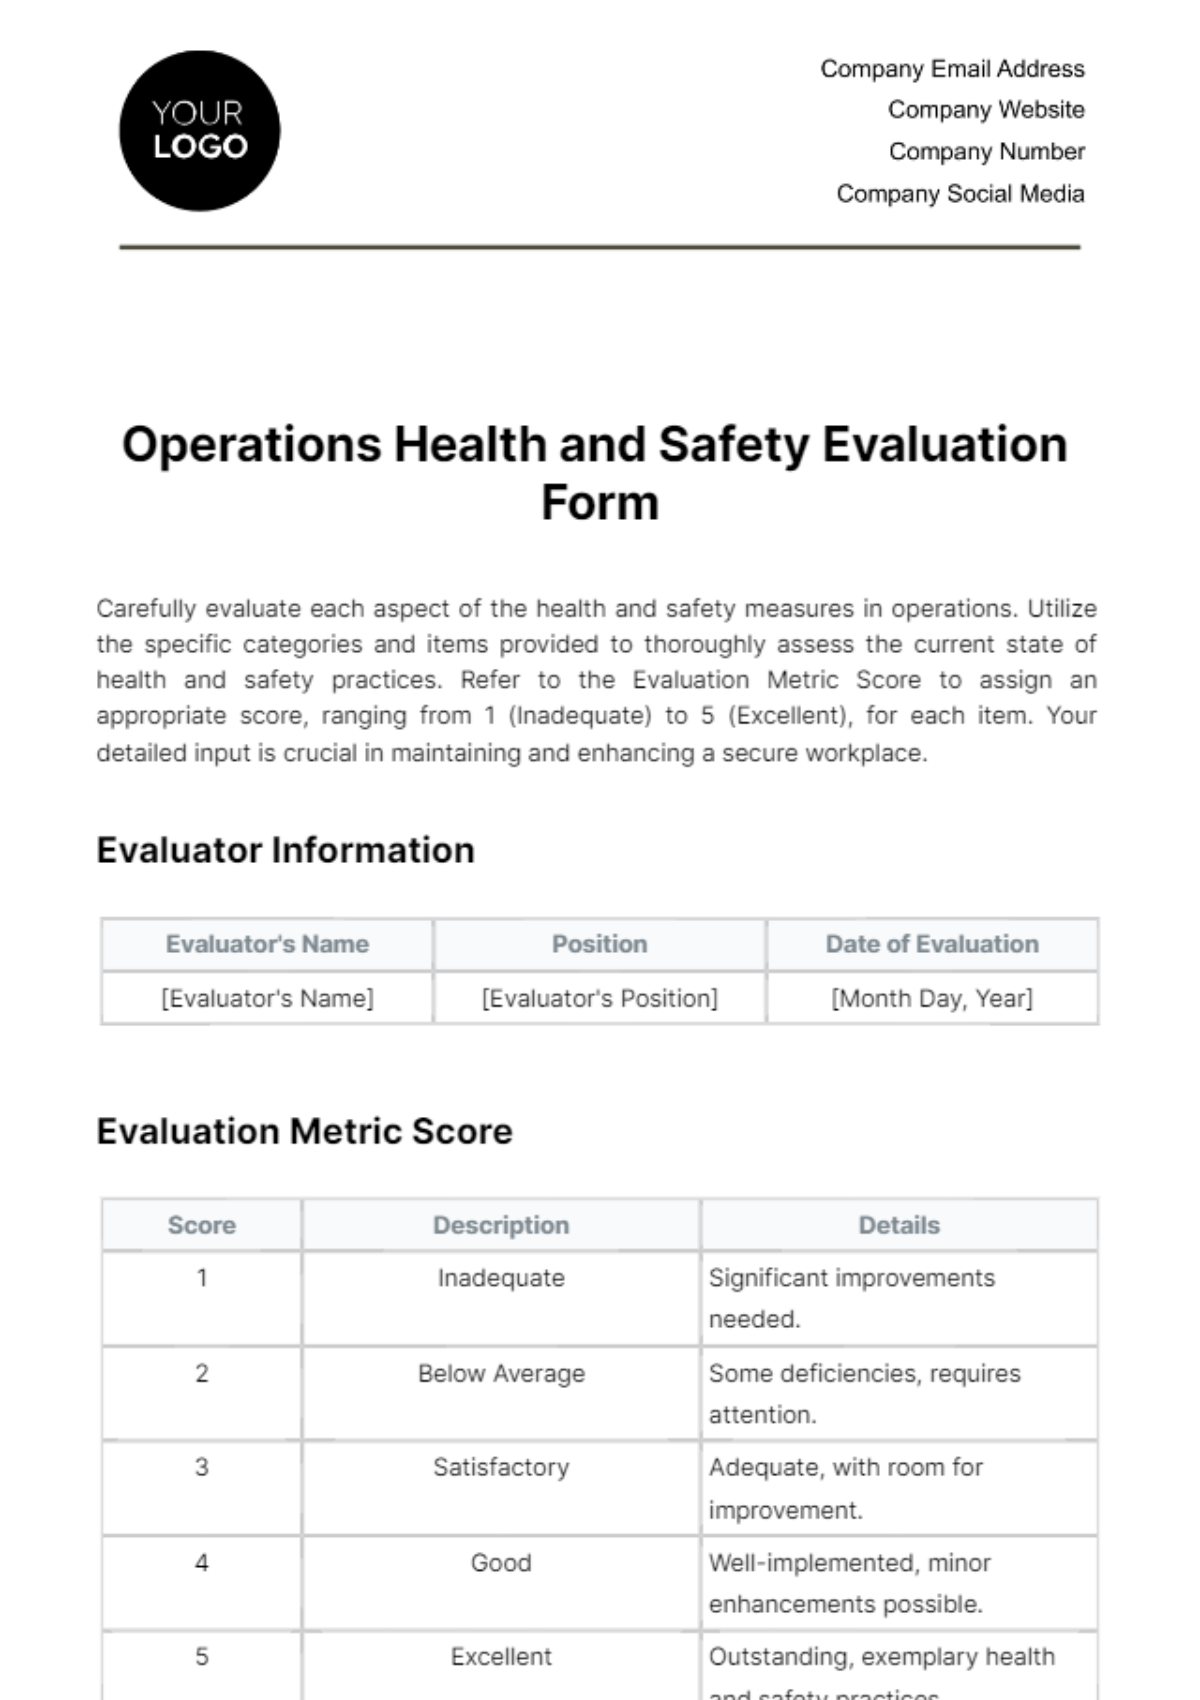 Free Operations Health and Safety Evaluation Form Template